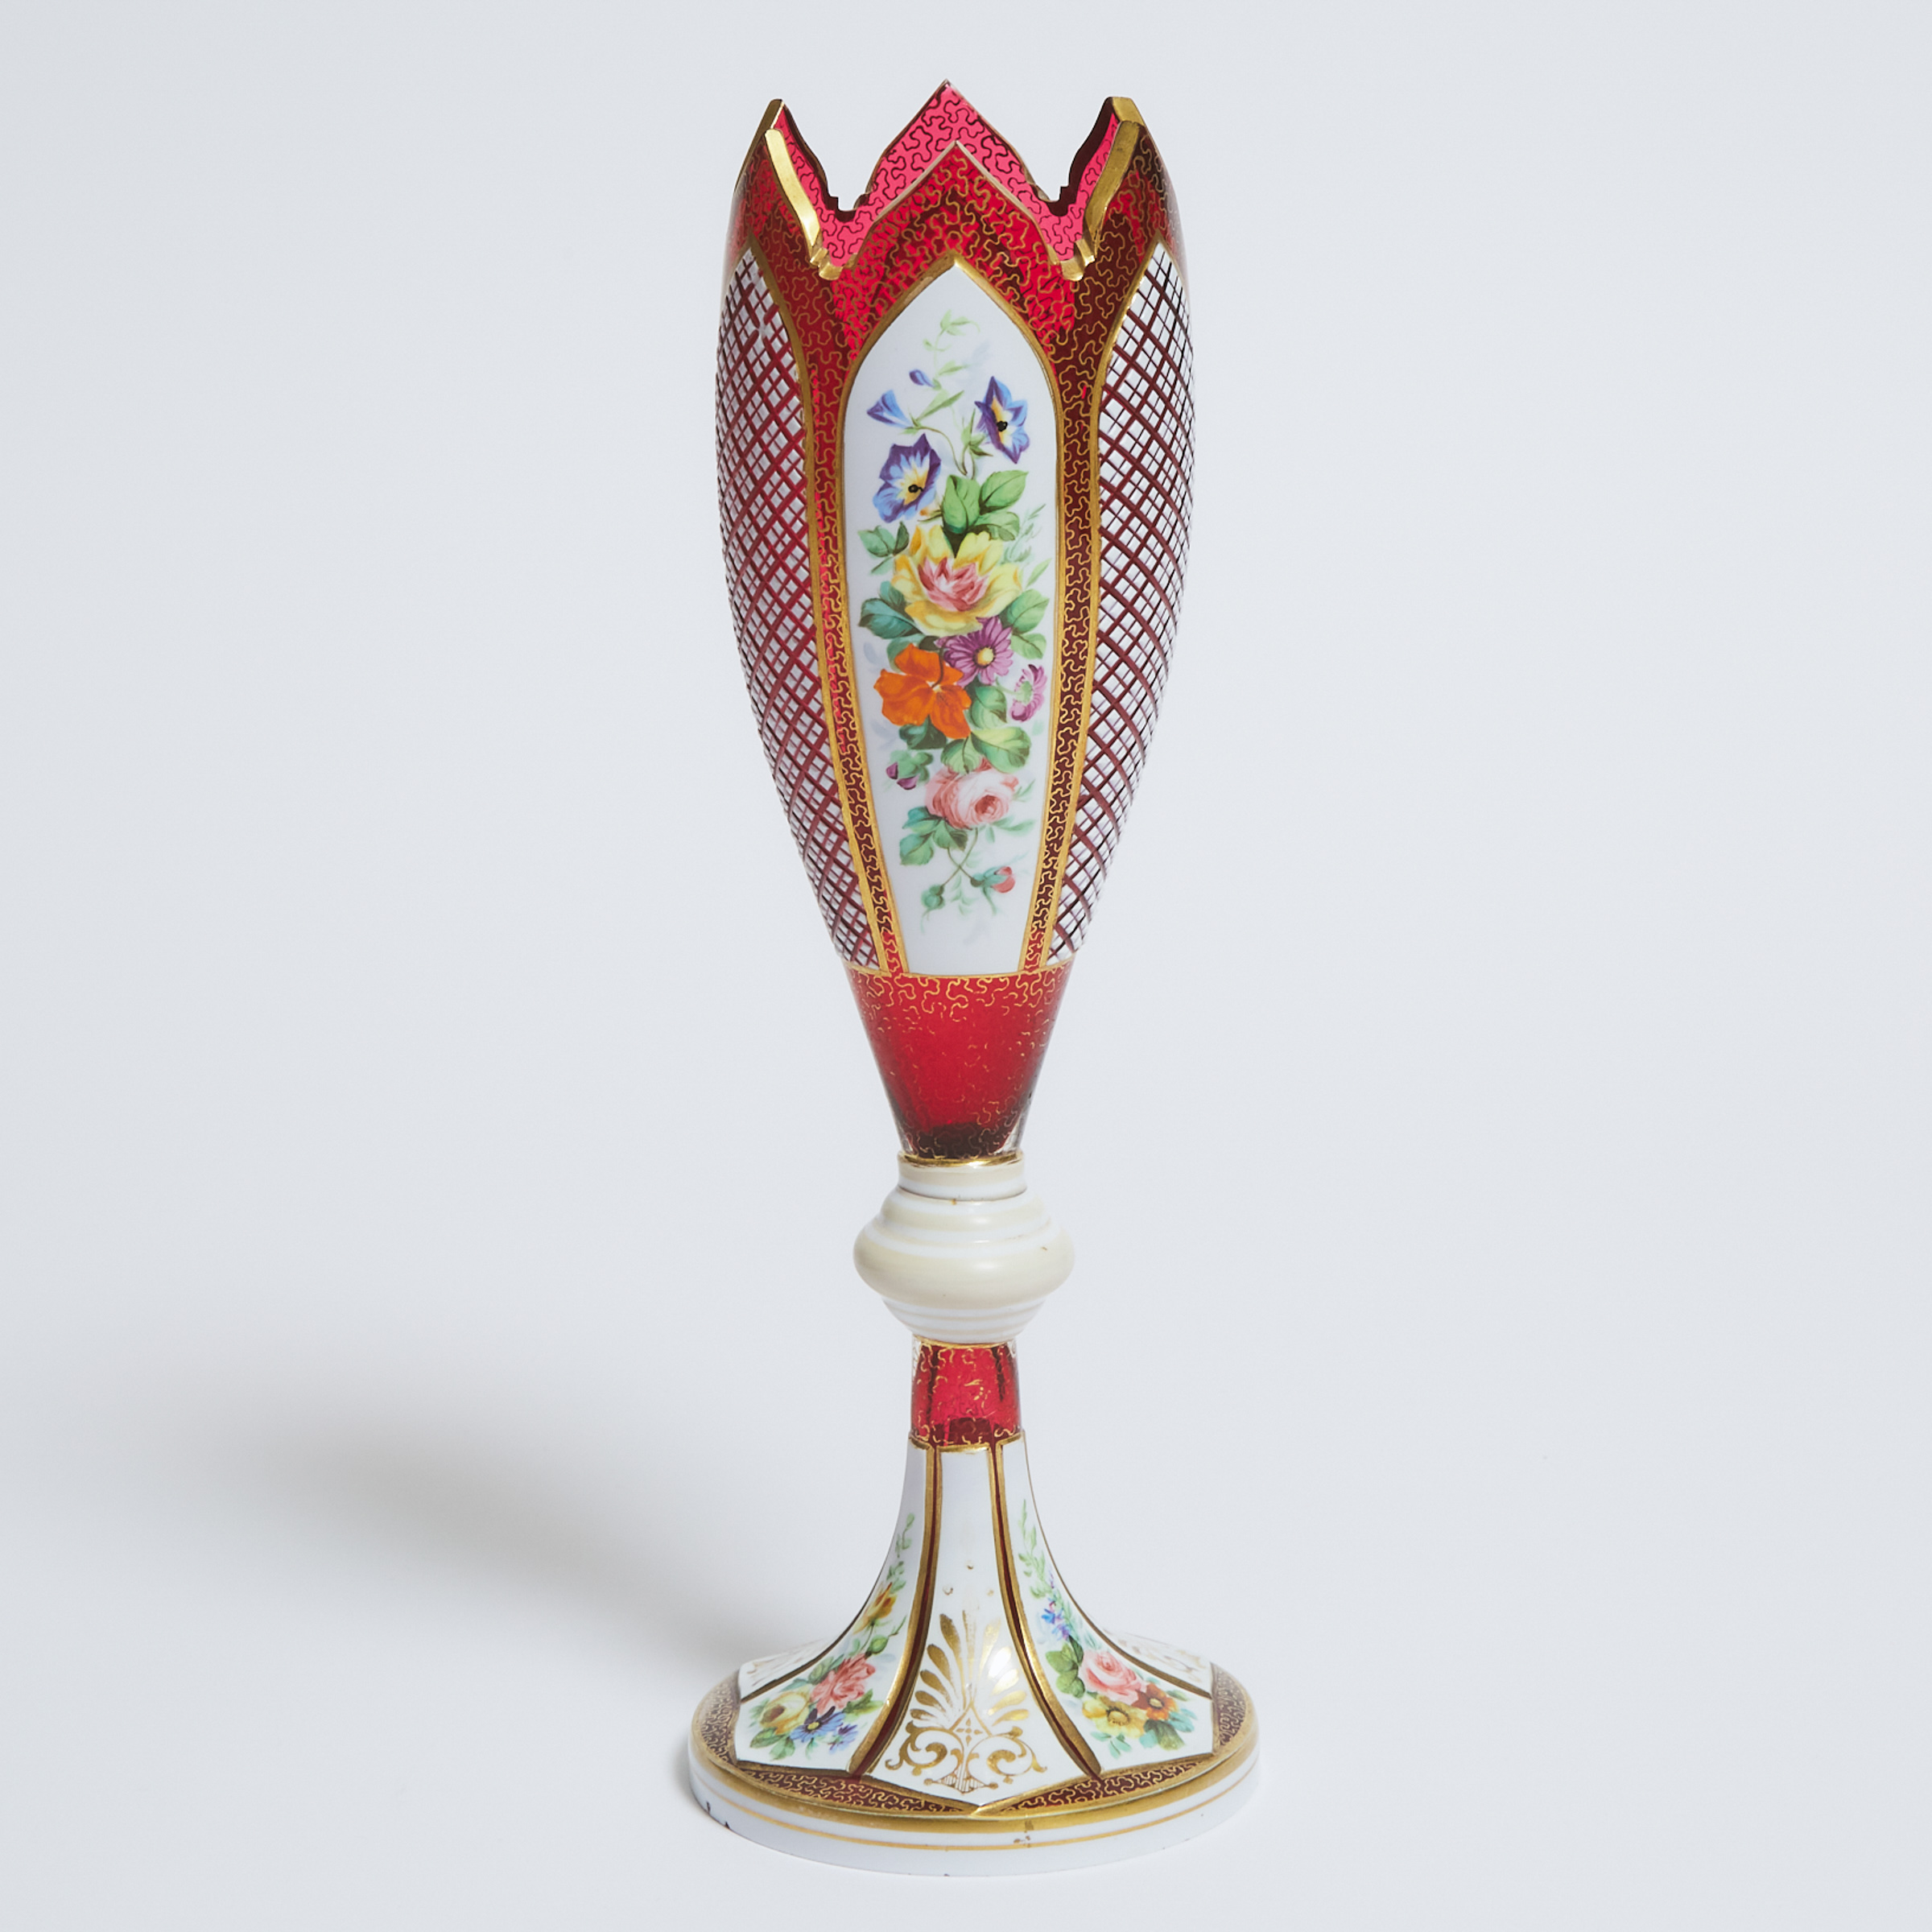 Bohemian Overlaid, Enameled and Gilt Red Glass Vase, late 19th century